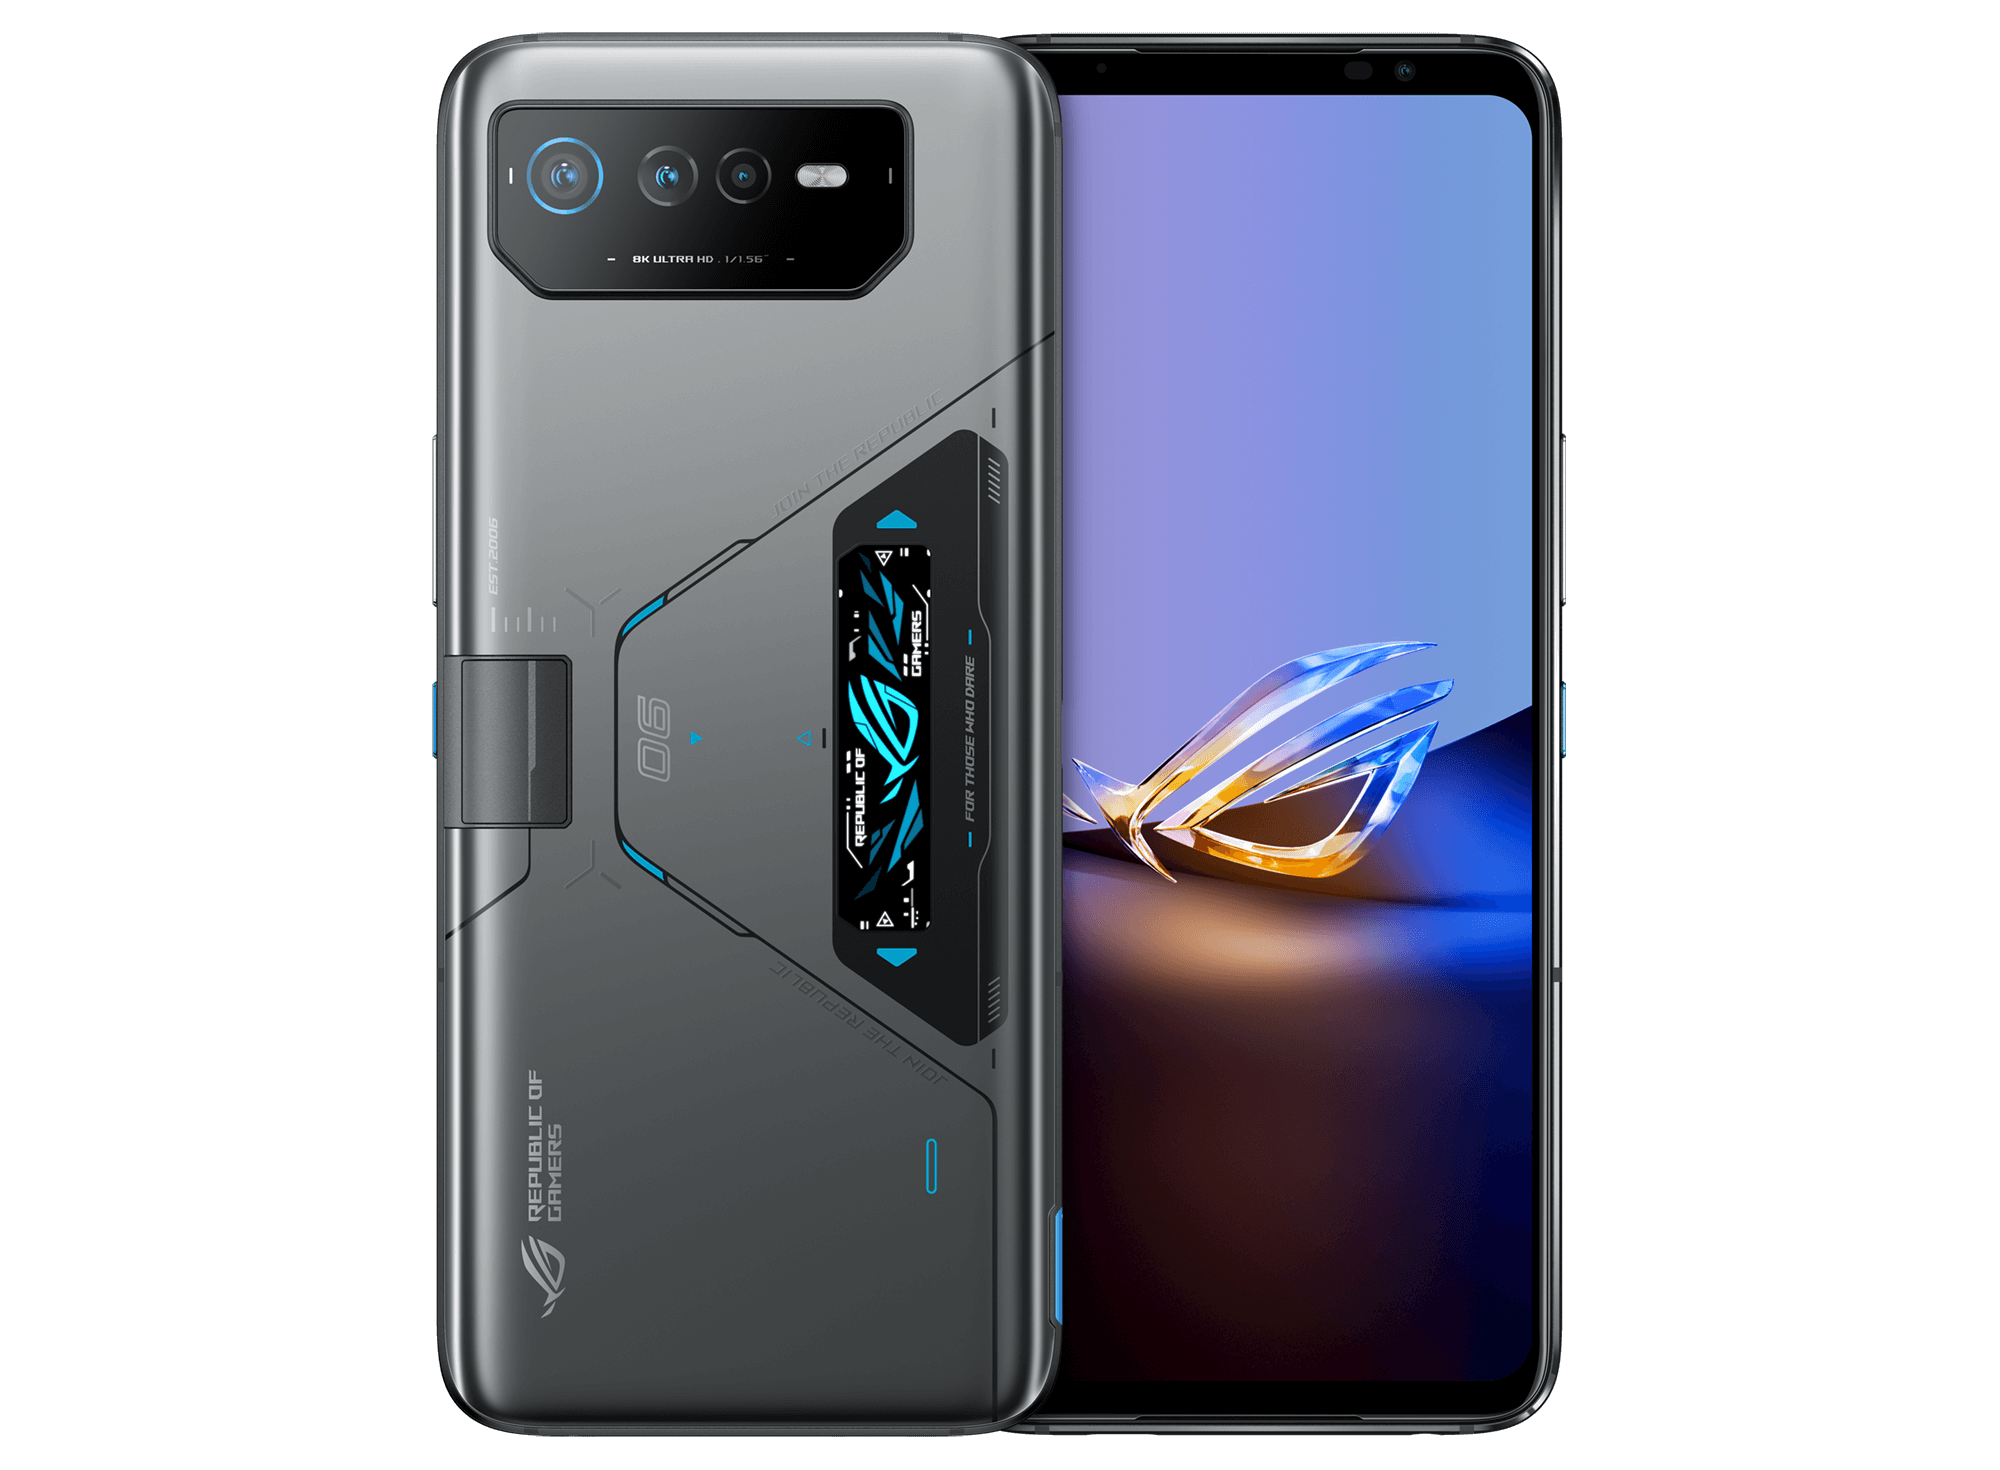 The Latest ASUS ROG Phone